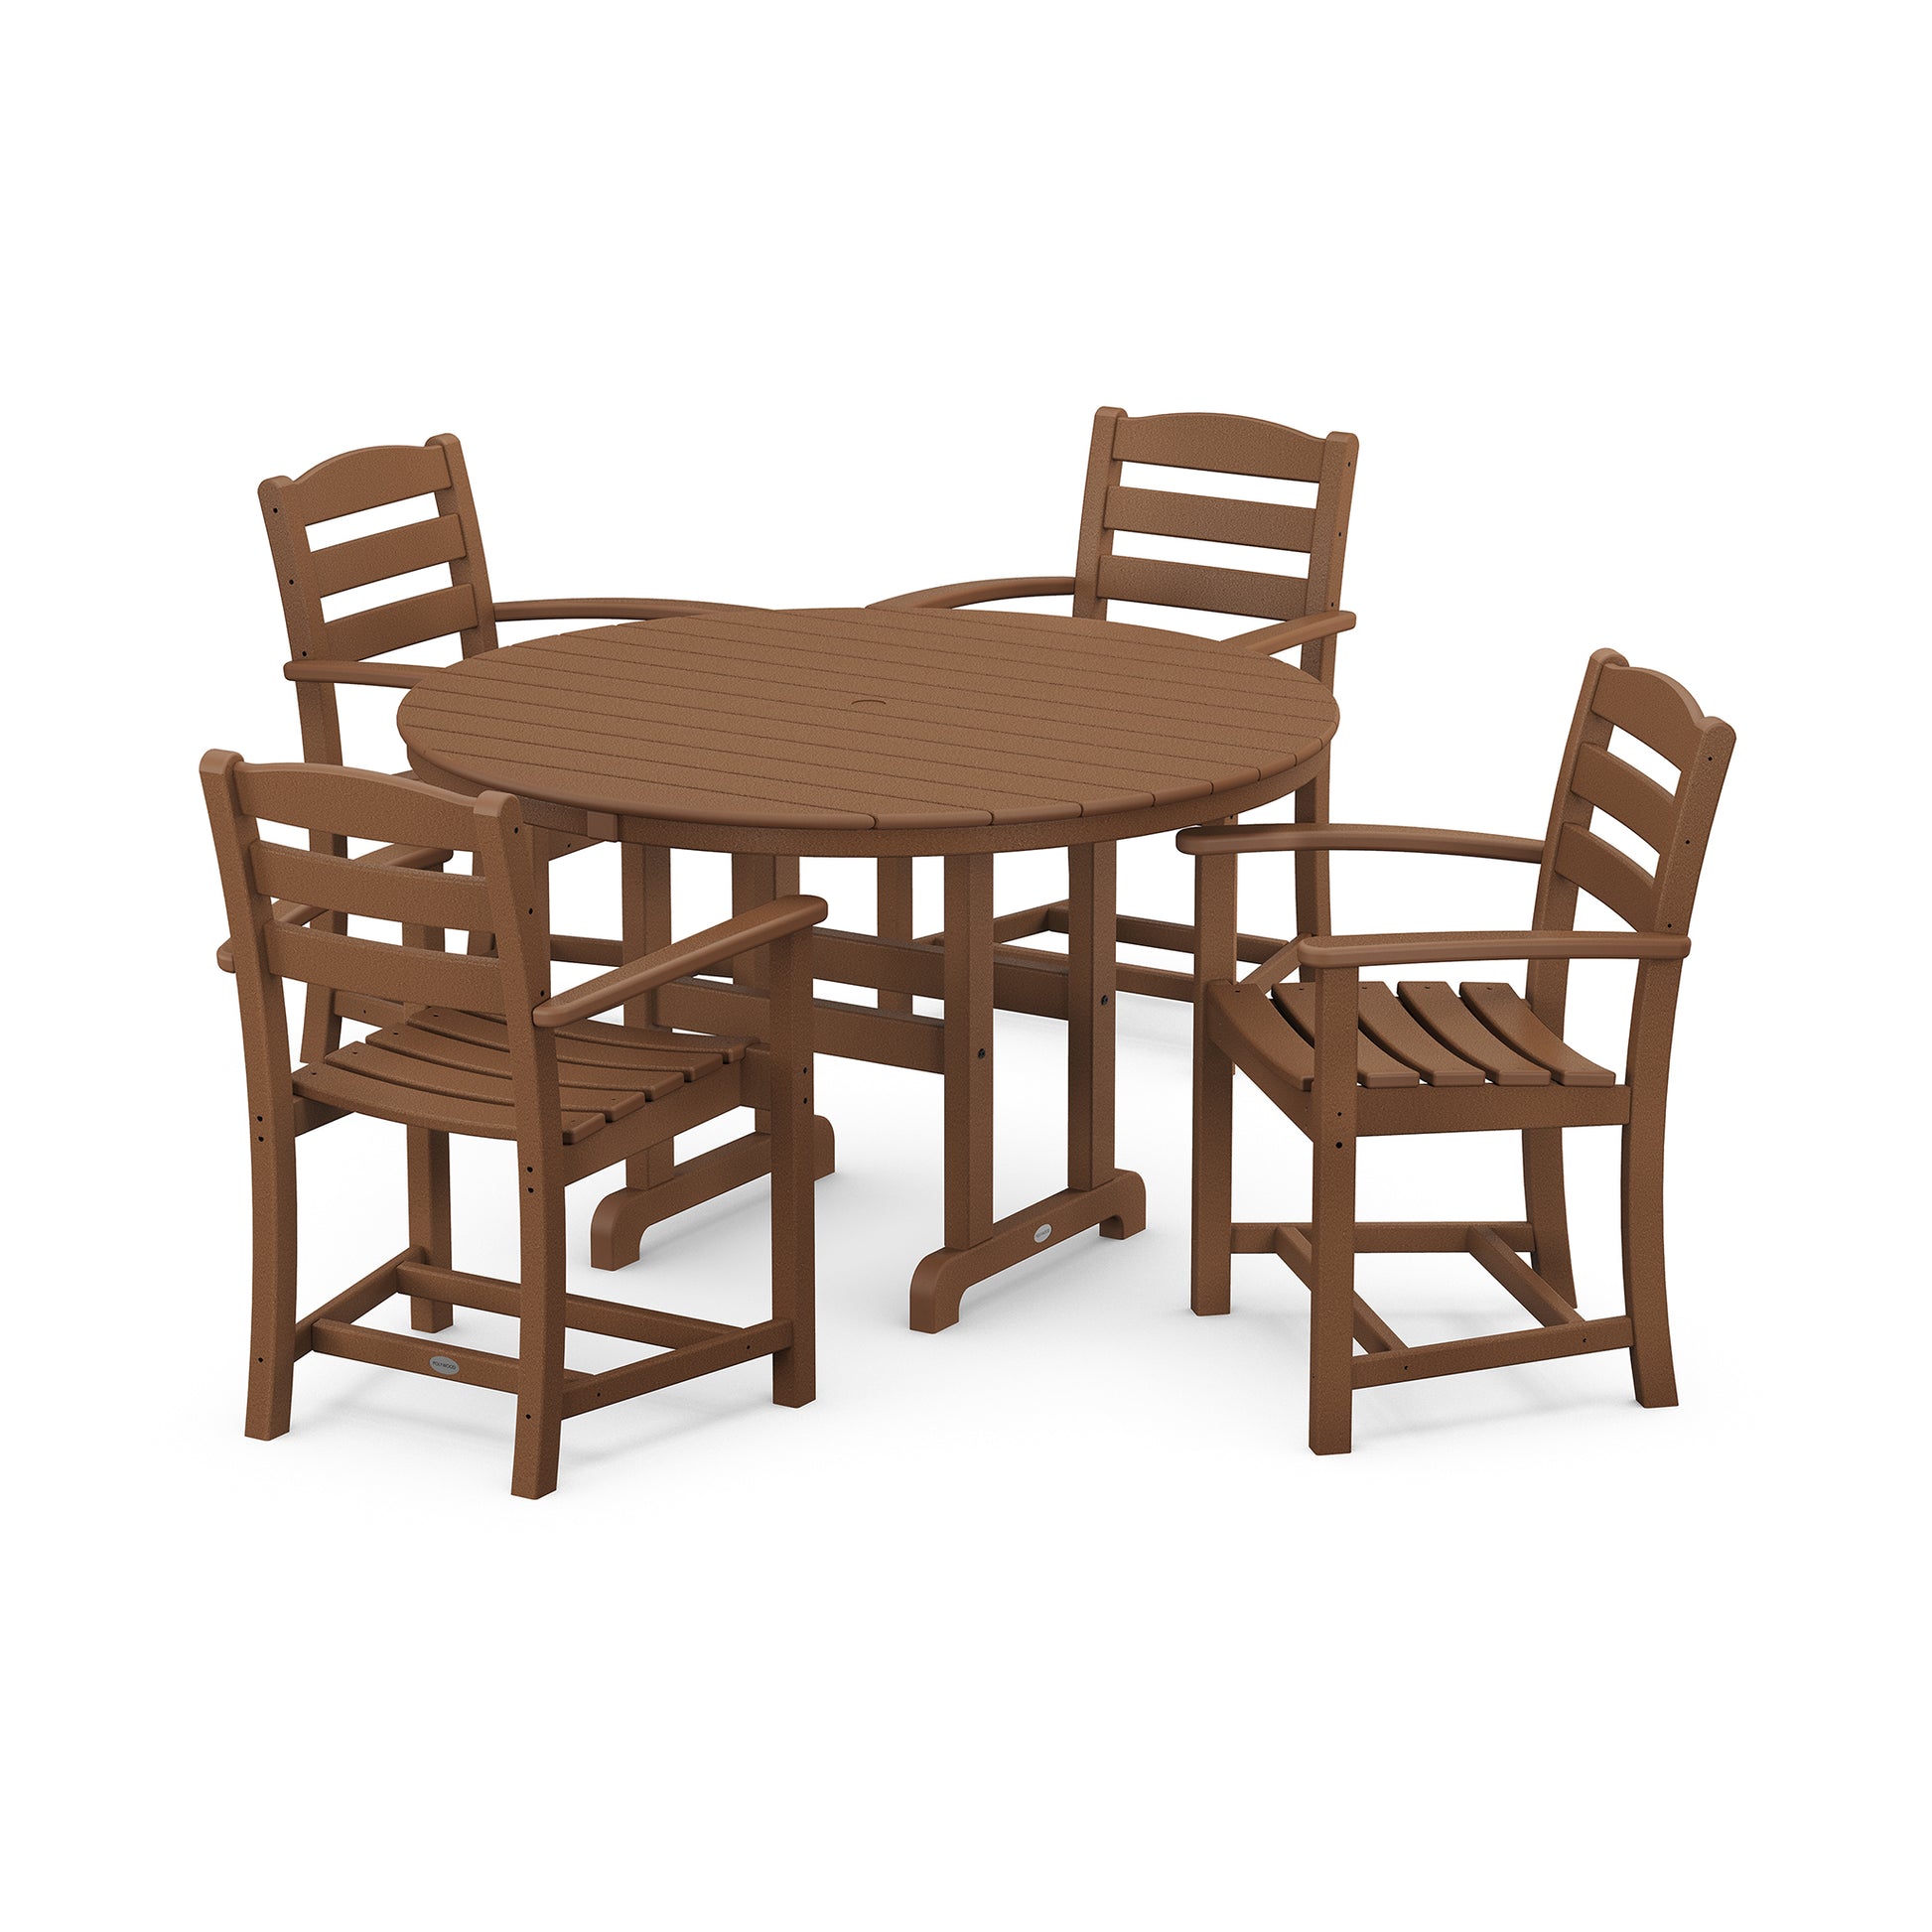 A brown, round POLYWOOD® La Casa Cafe 5-Piece Dining Set with four matching chairs, all made of recycled lumber, displayed on a plain white background.